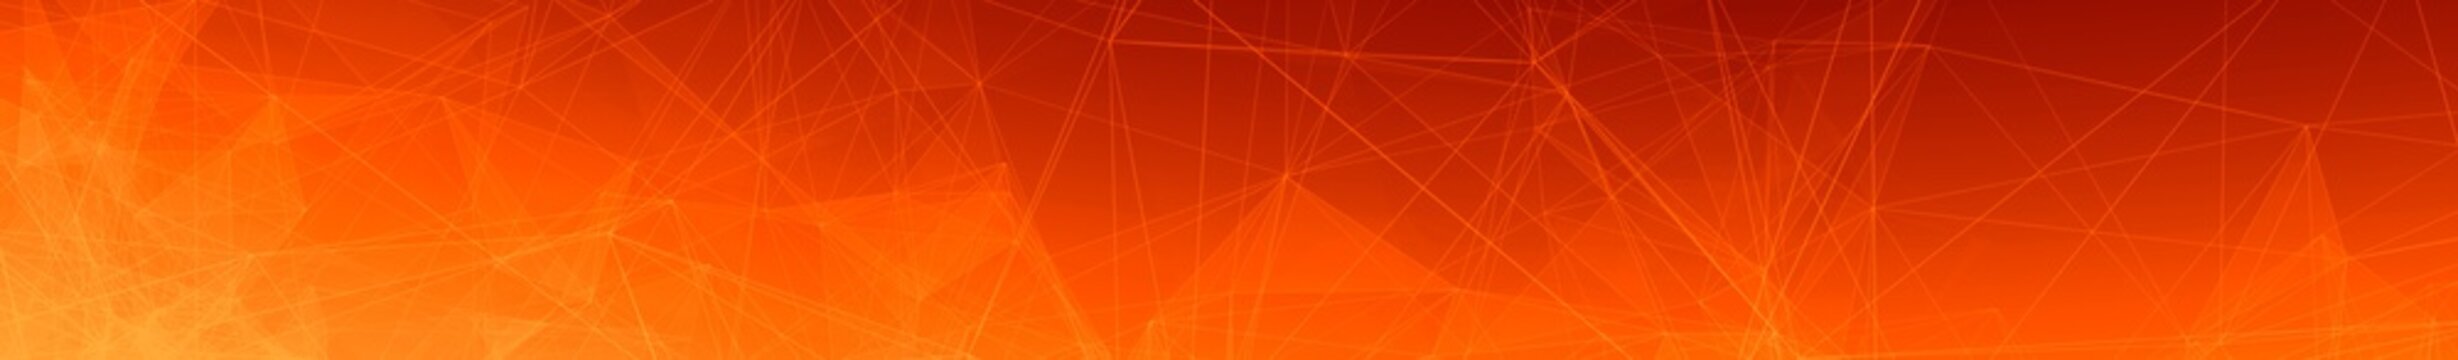 Yellow Trippy Abstract Plexus Polygon wireframe Shapes on Orange Gradient Background. Full Web Banner 3D Illustration. © remotevfx